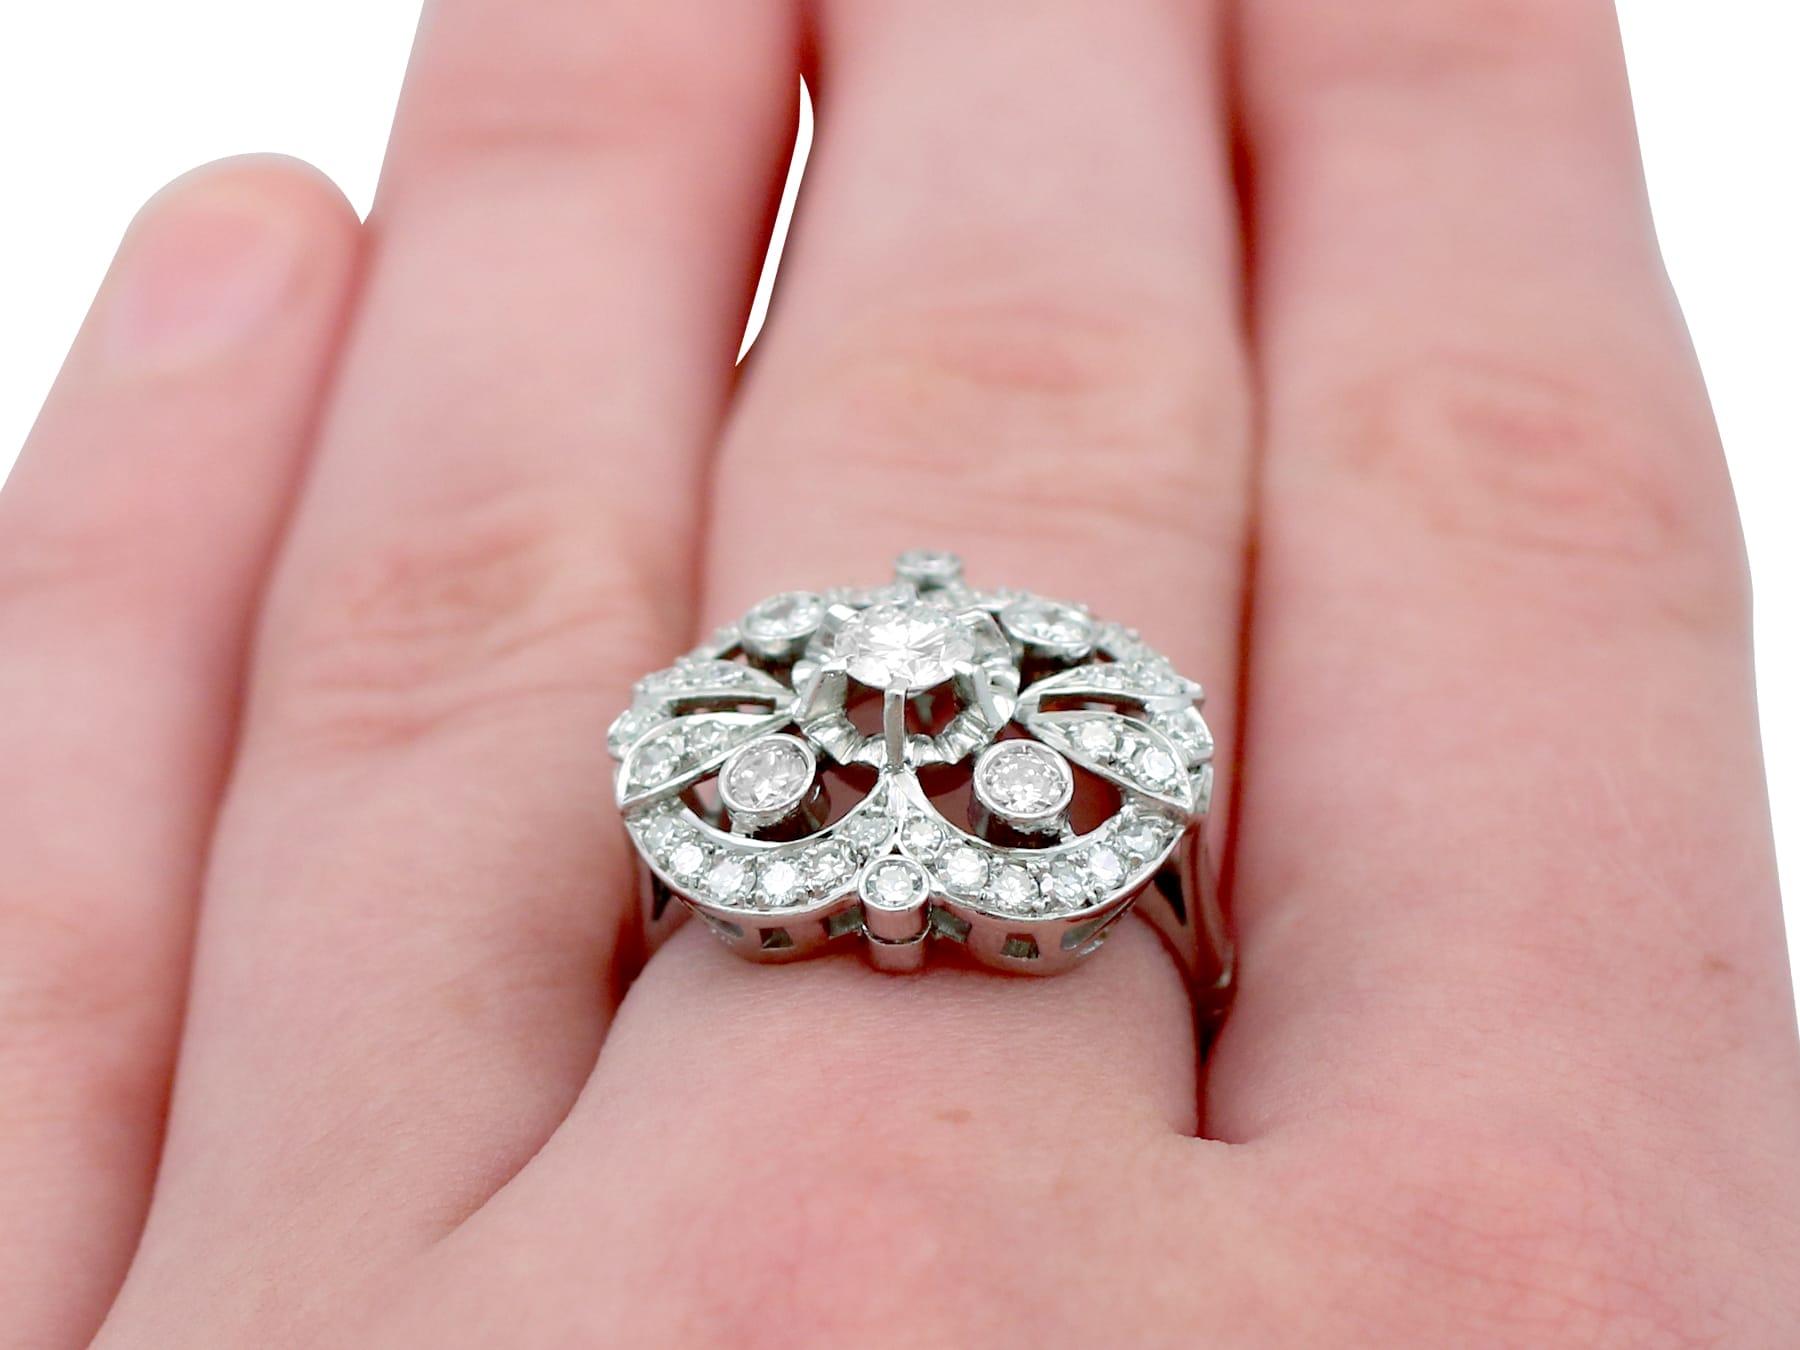 Antique 1.68 Carat Diamond and White Gold Cluster Ring For Sale 2